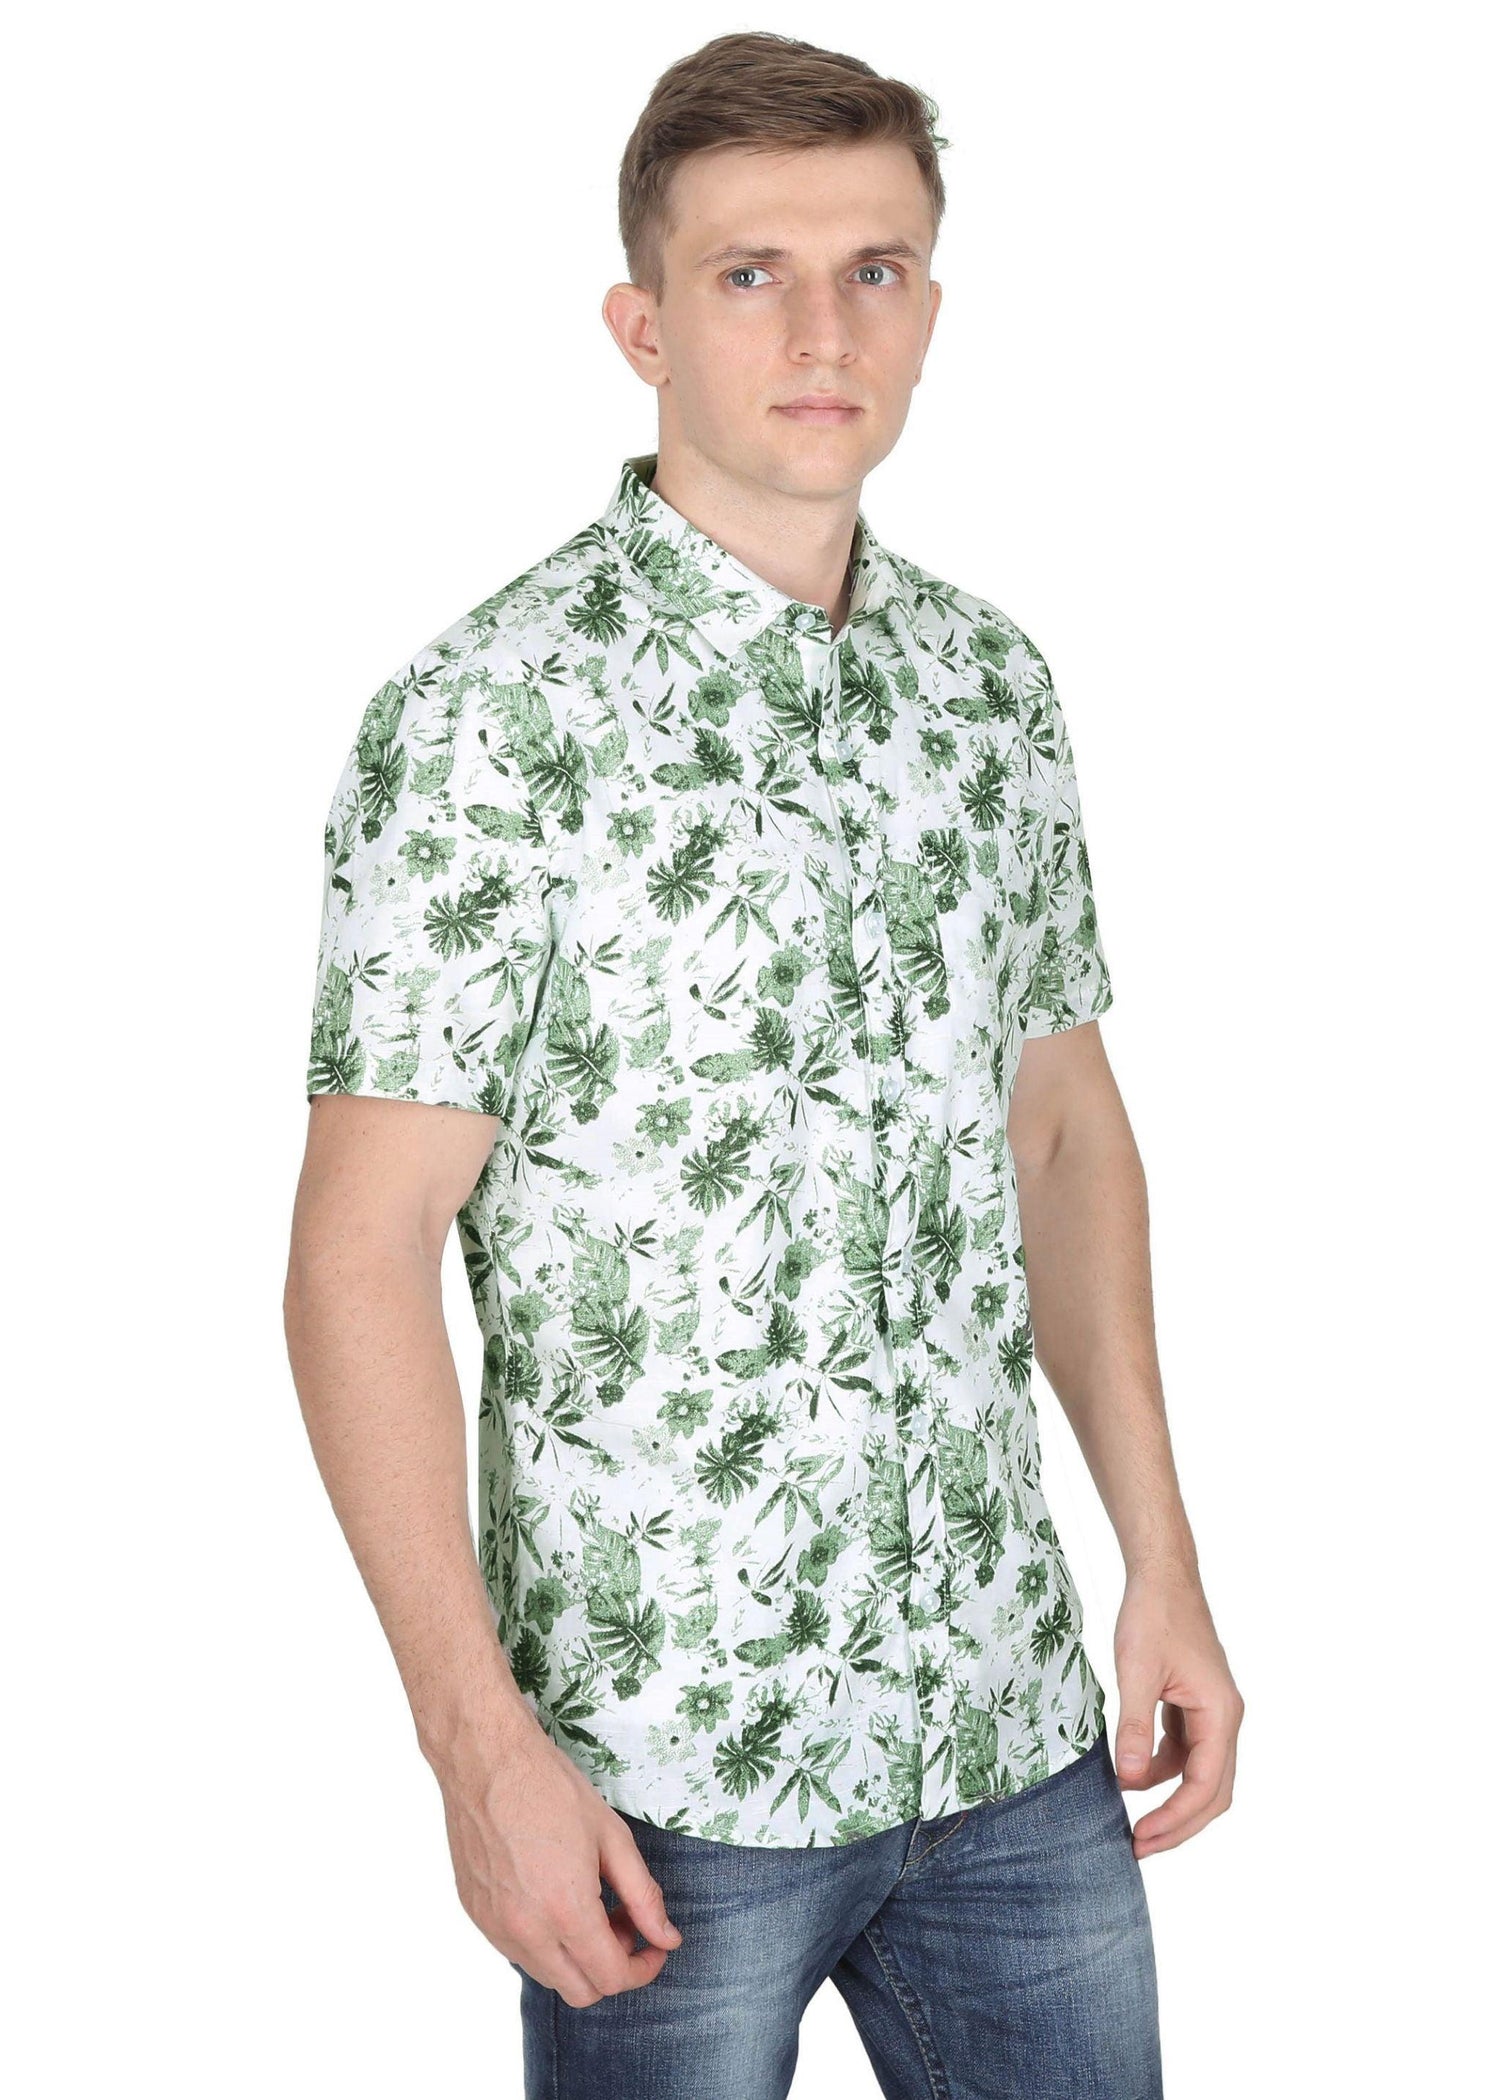 Tusok-orchardFeatured Shirt, Vacation-Printed Shirtimage-Green Linen (3)